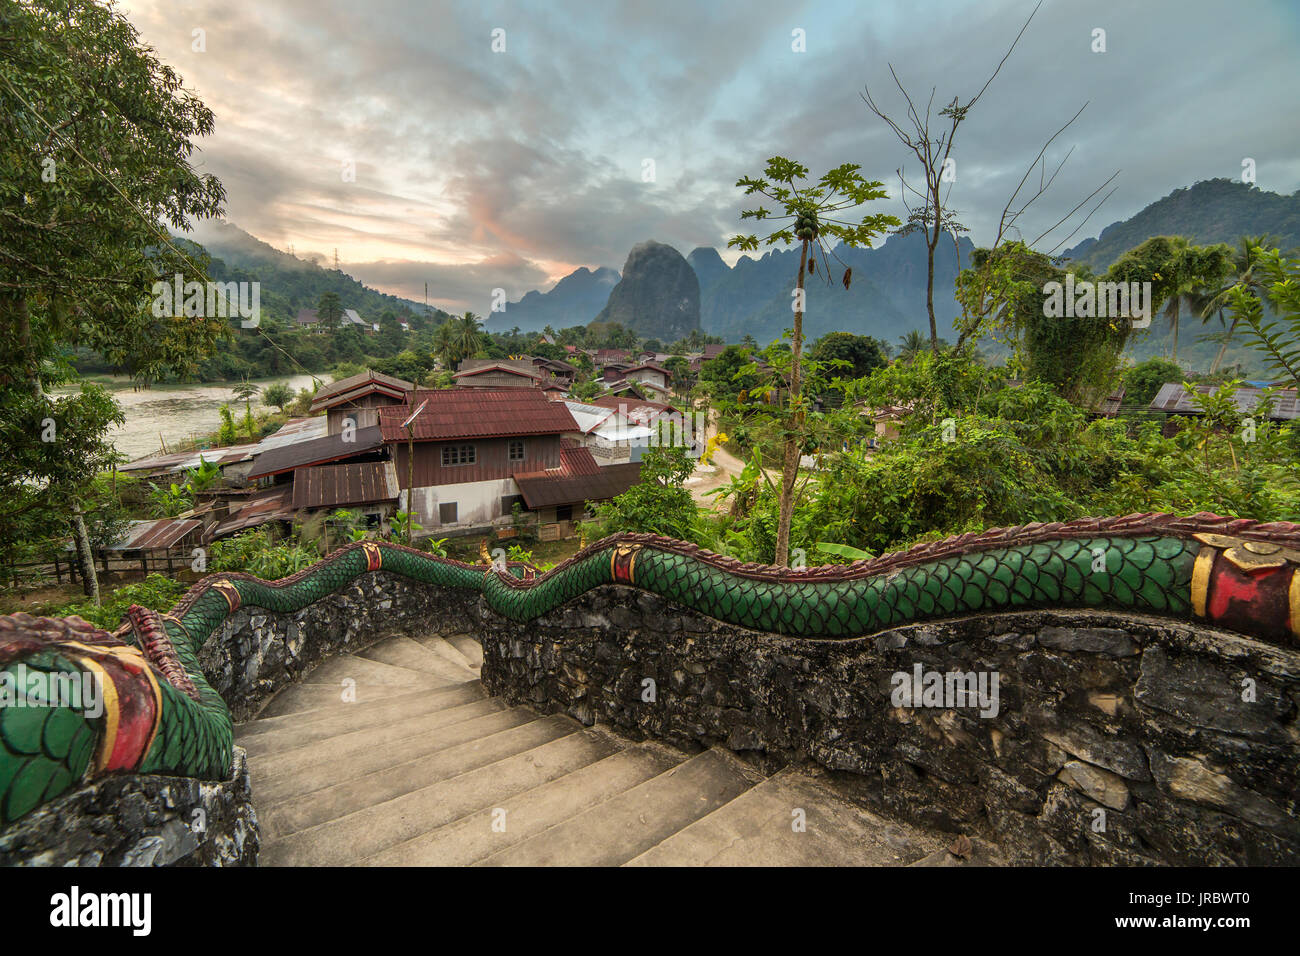 Traditional lao village with temple stairs and mountain background near Vang Vieng, Laos. Stock Photo